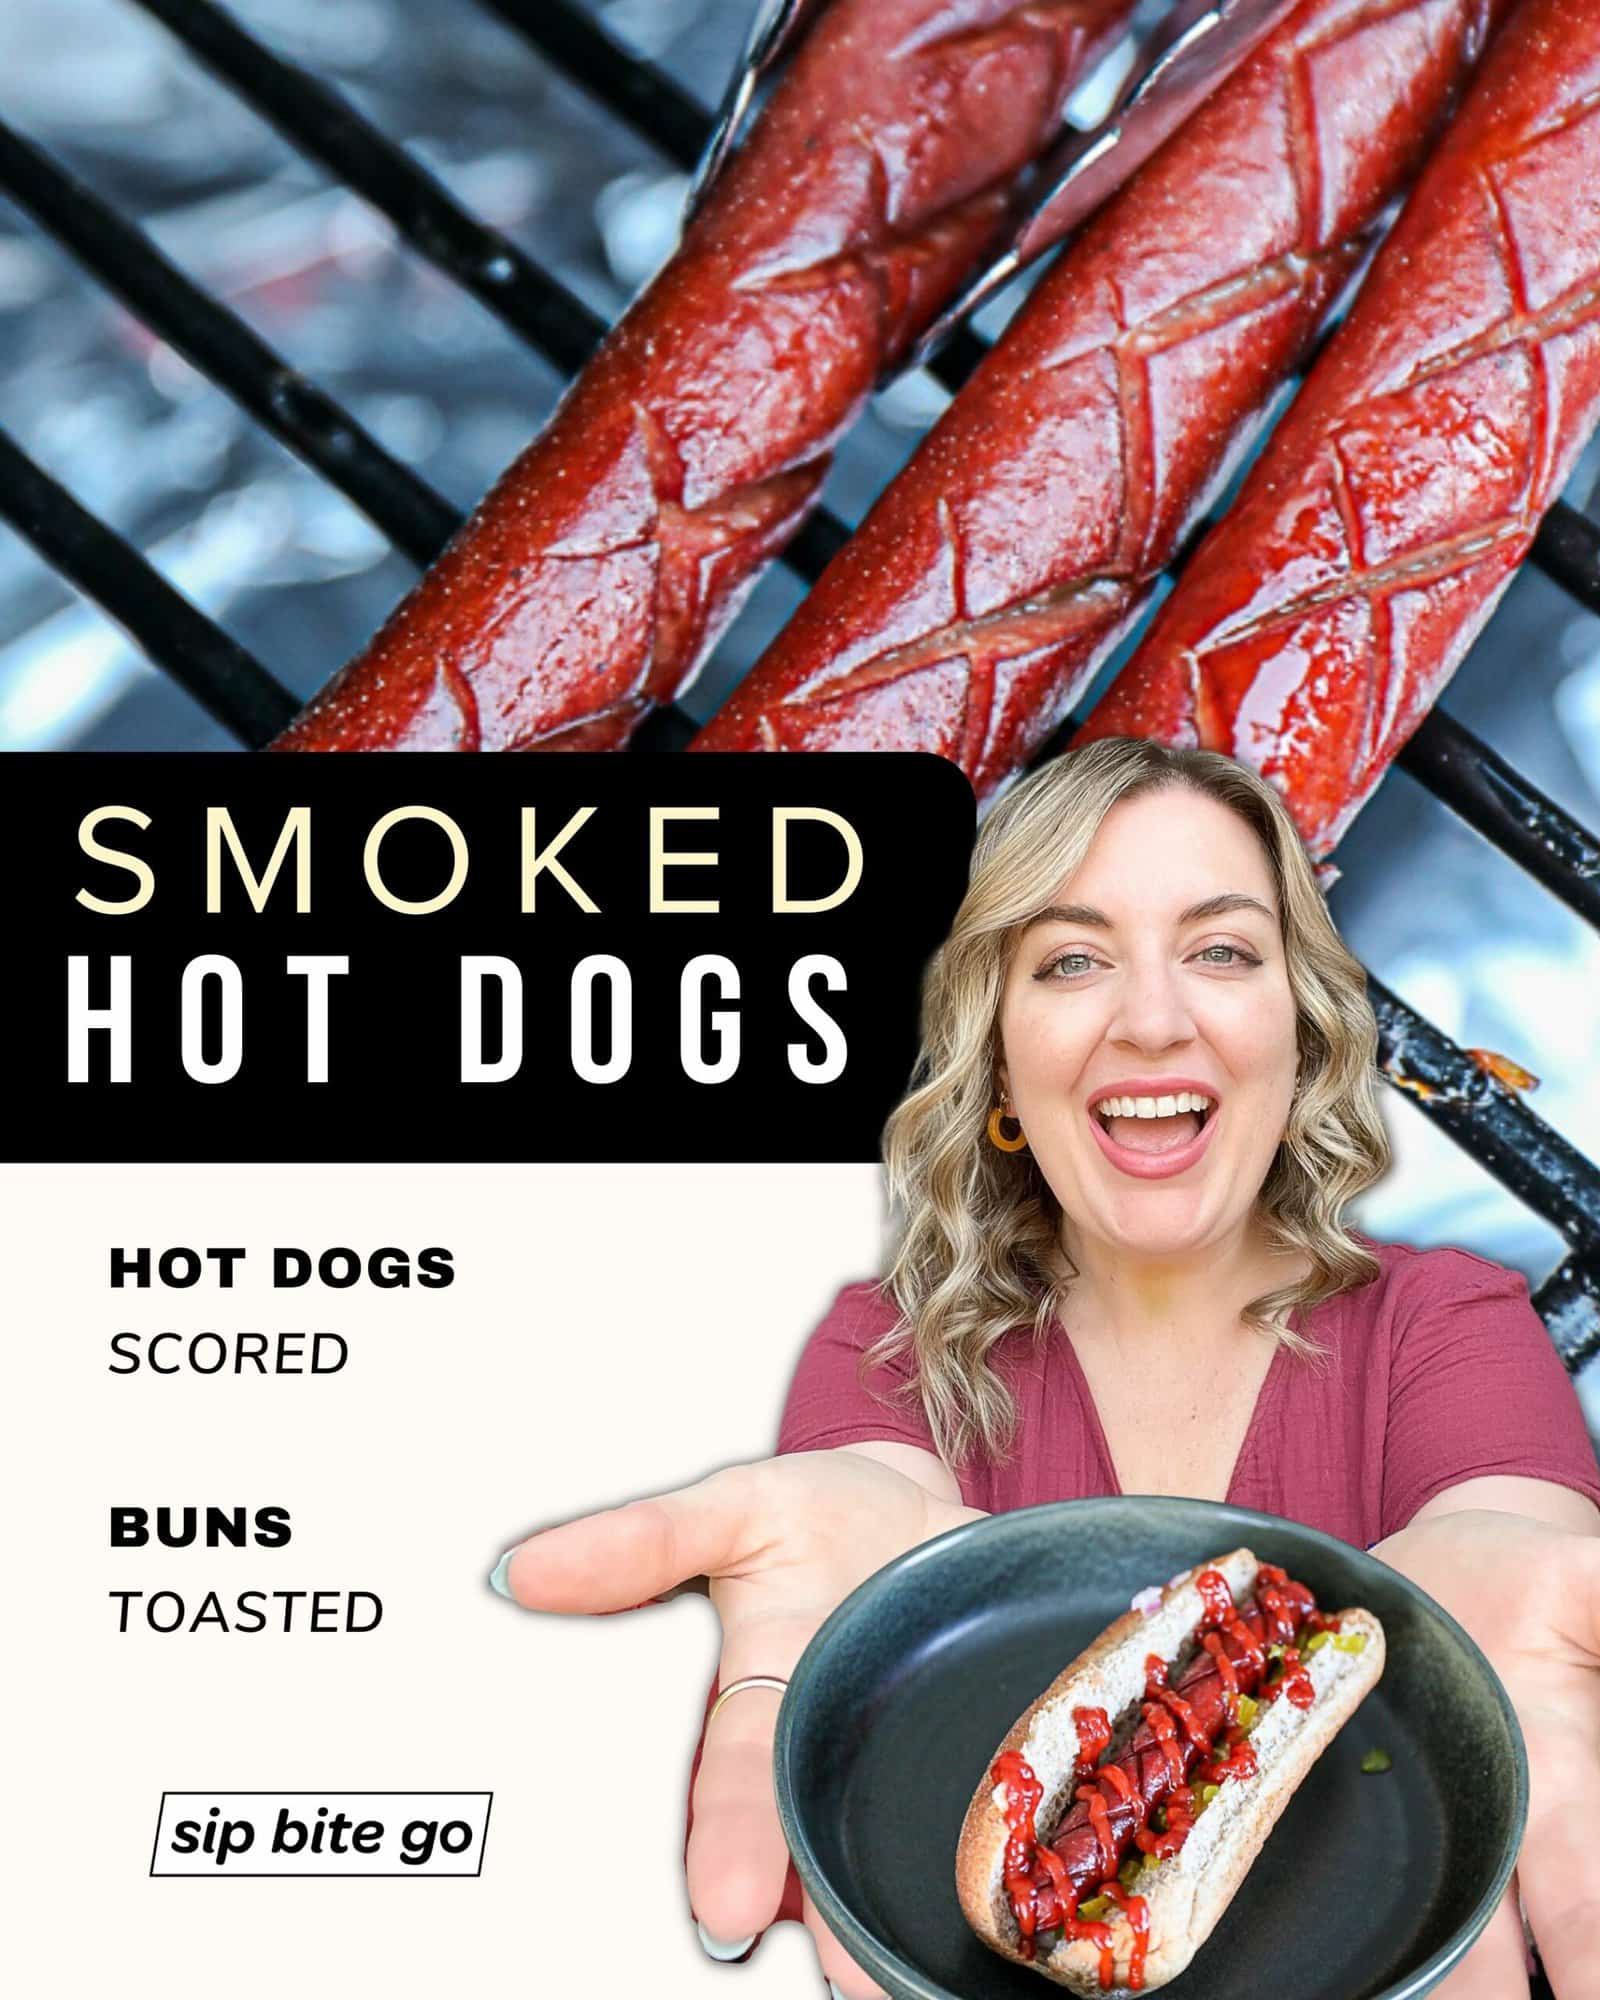 Infographic with ingredients for smoked hot dog recipe with traeger grill grates and text captions with Jenna Passaro food bogger of Sip Bite Go.jpg